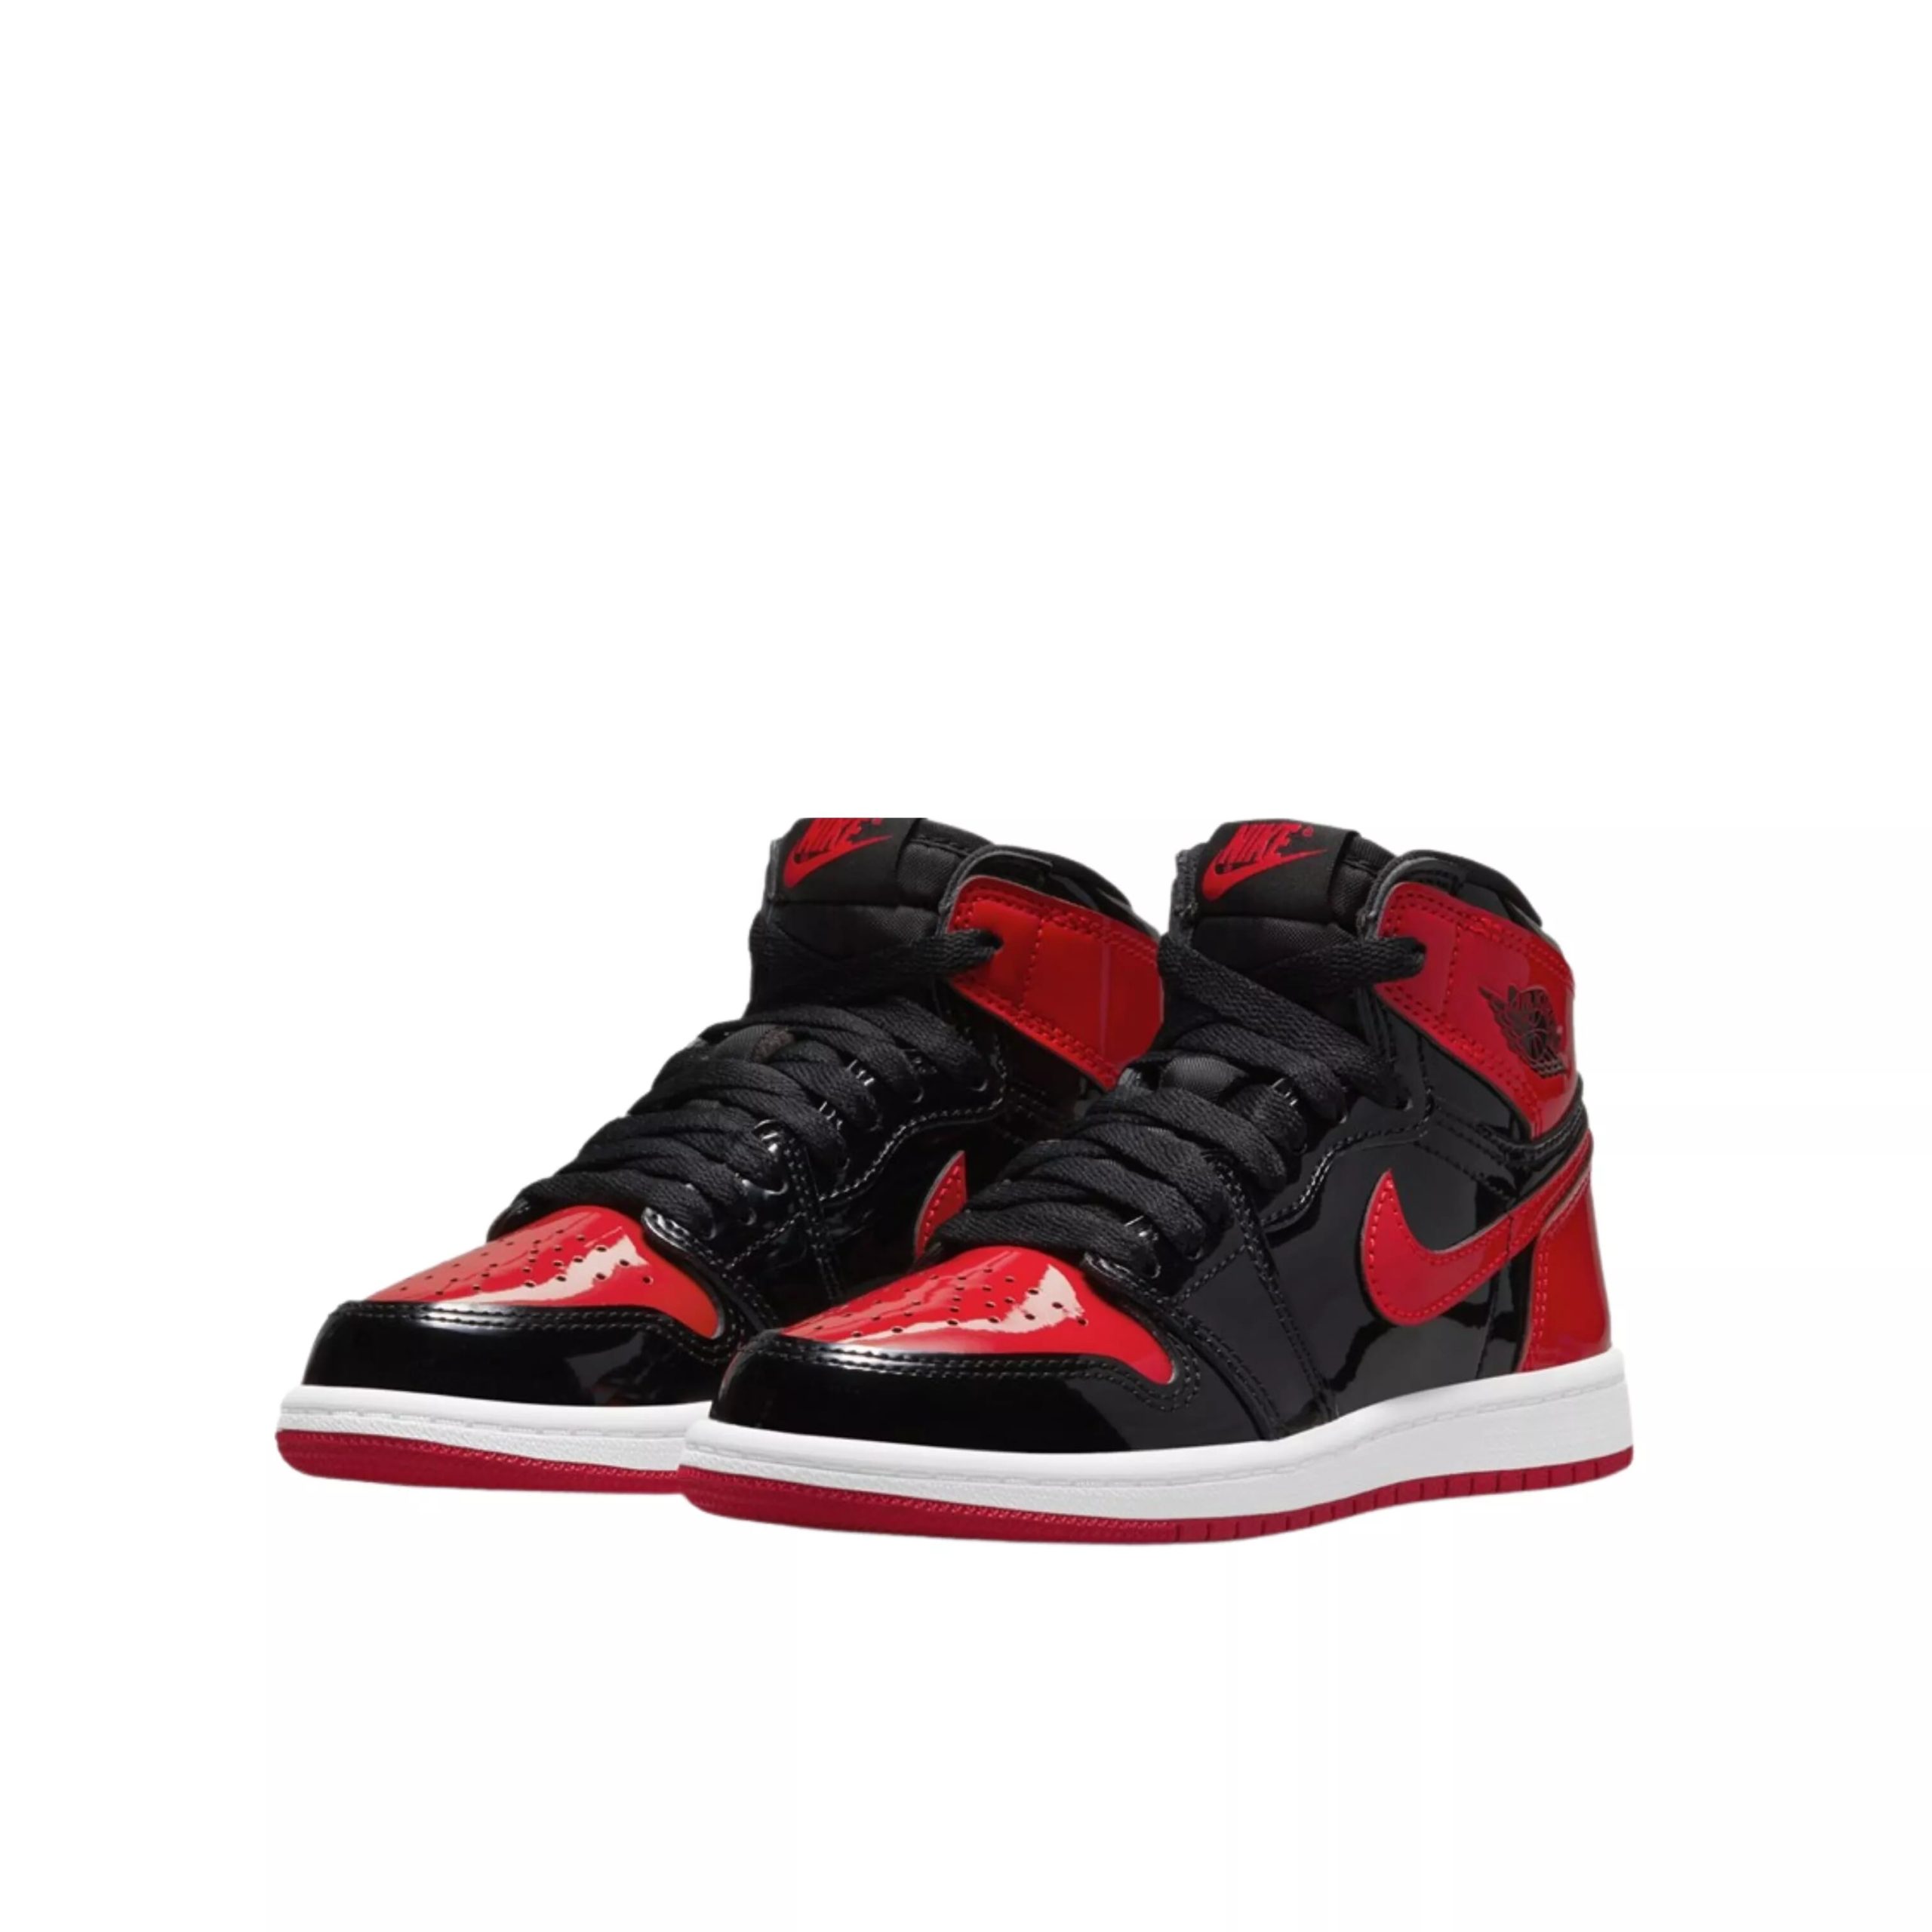 1 air jordan 1 retro high og patent bred child and baby 9999 scaled